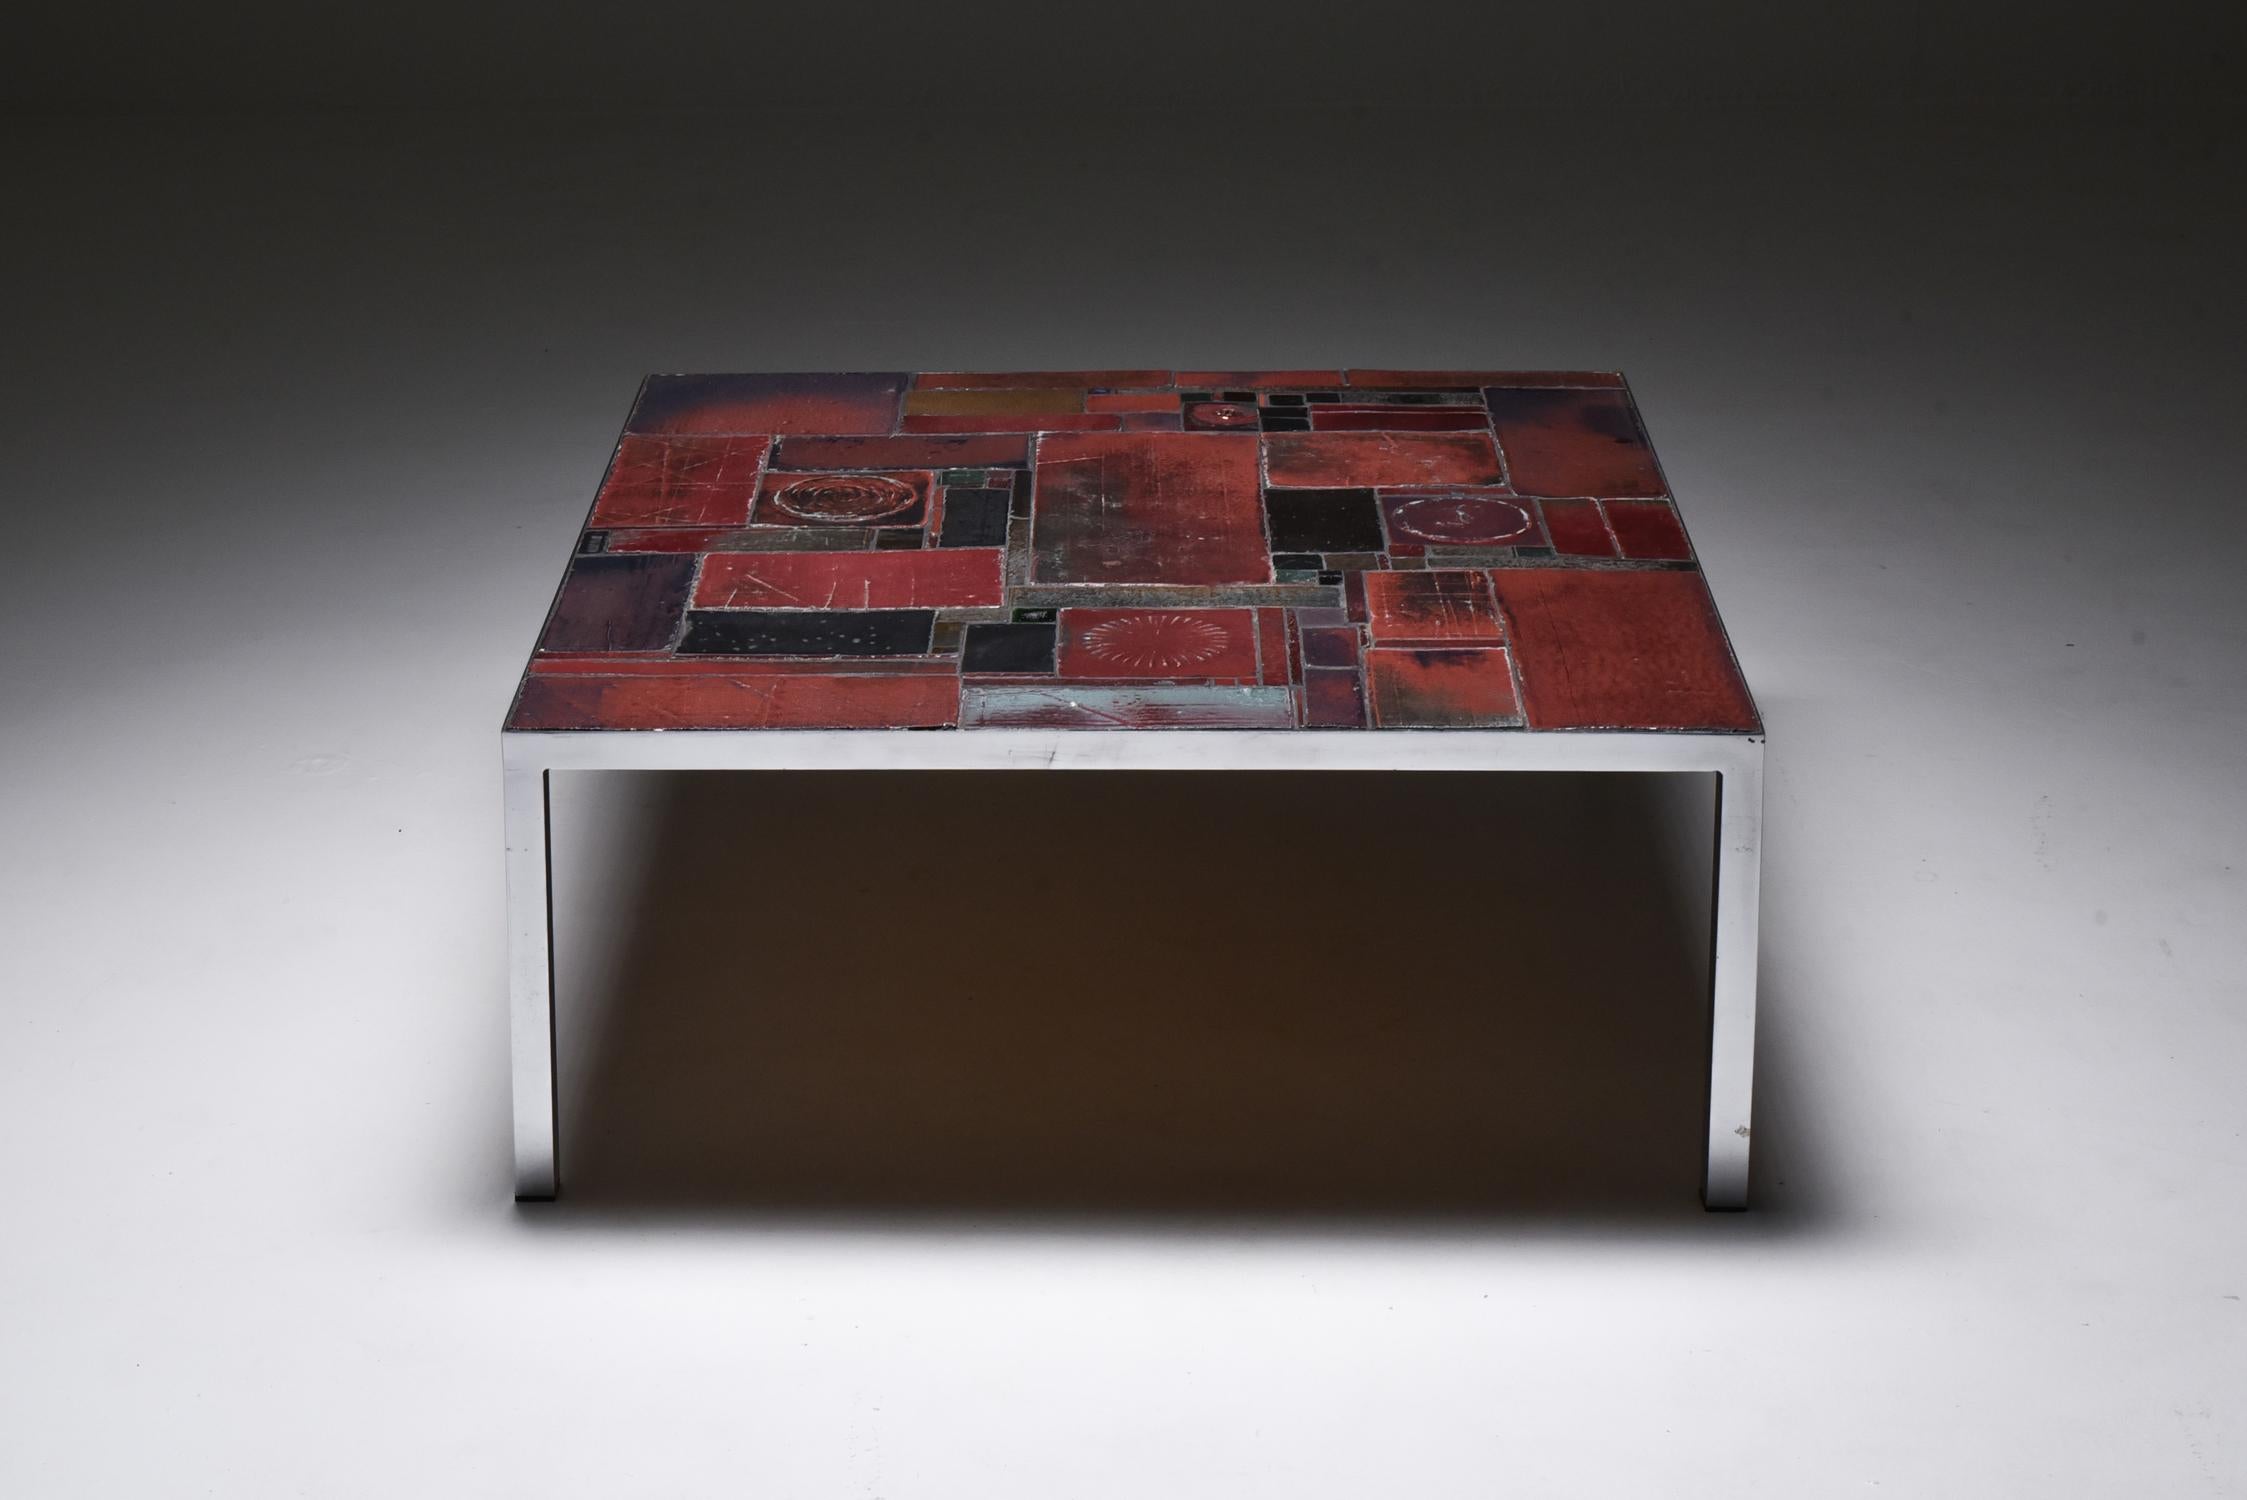 Pia Manu, coffee table, slate, chromed steel, Belgium, 1960s

This unique, handmade coffee table with chromed steel frame is designed in the workshop of Pia Manu. The table top is a true eye-catcher. With its subtle tones of reds and black the